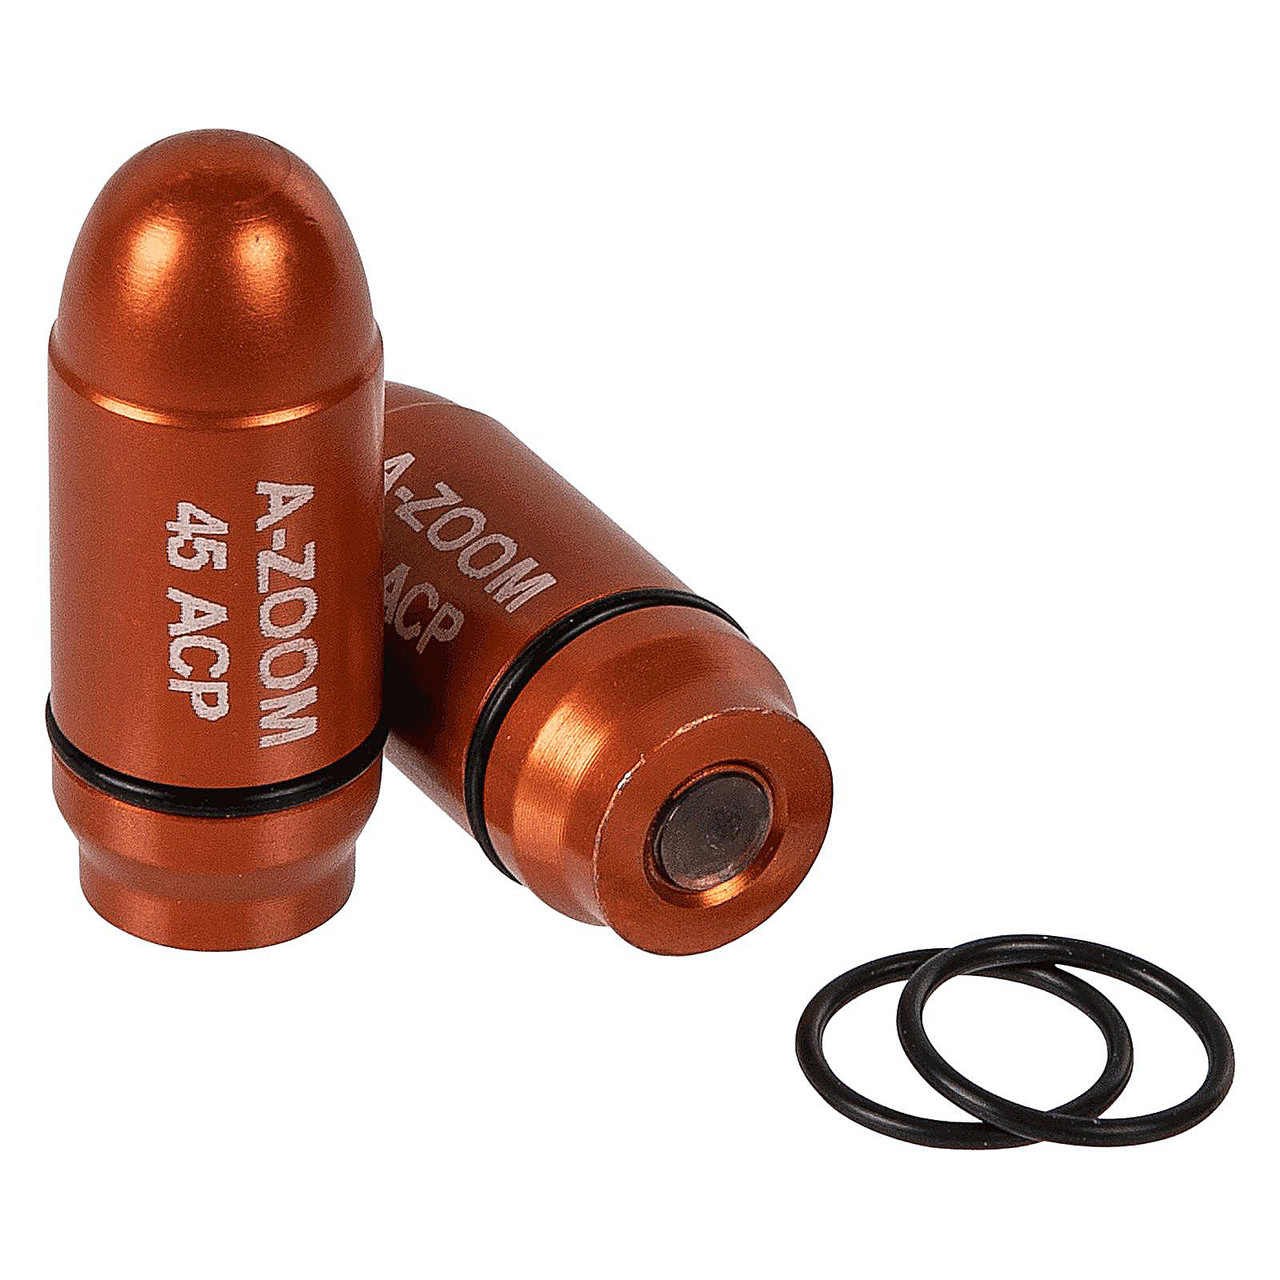 A-ZOOM Striker Caps for 45 ACP 2 Pack NEW! # 17104 